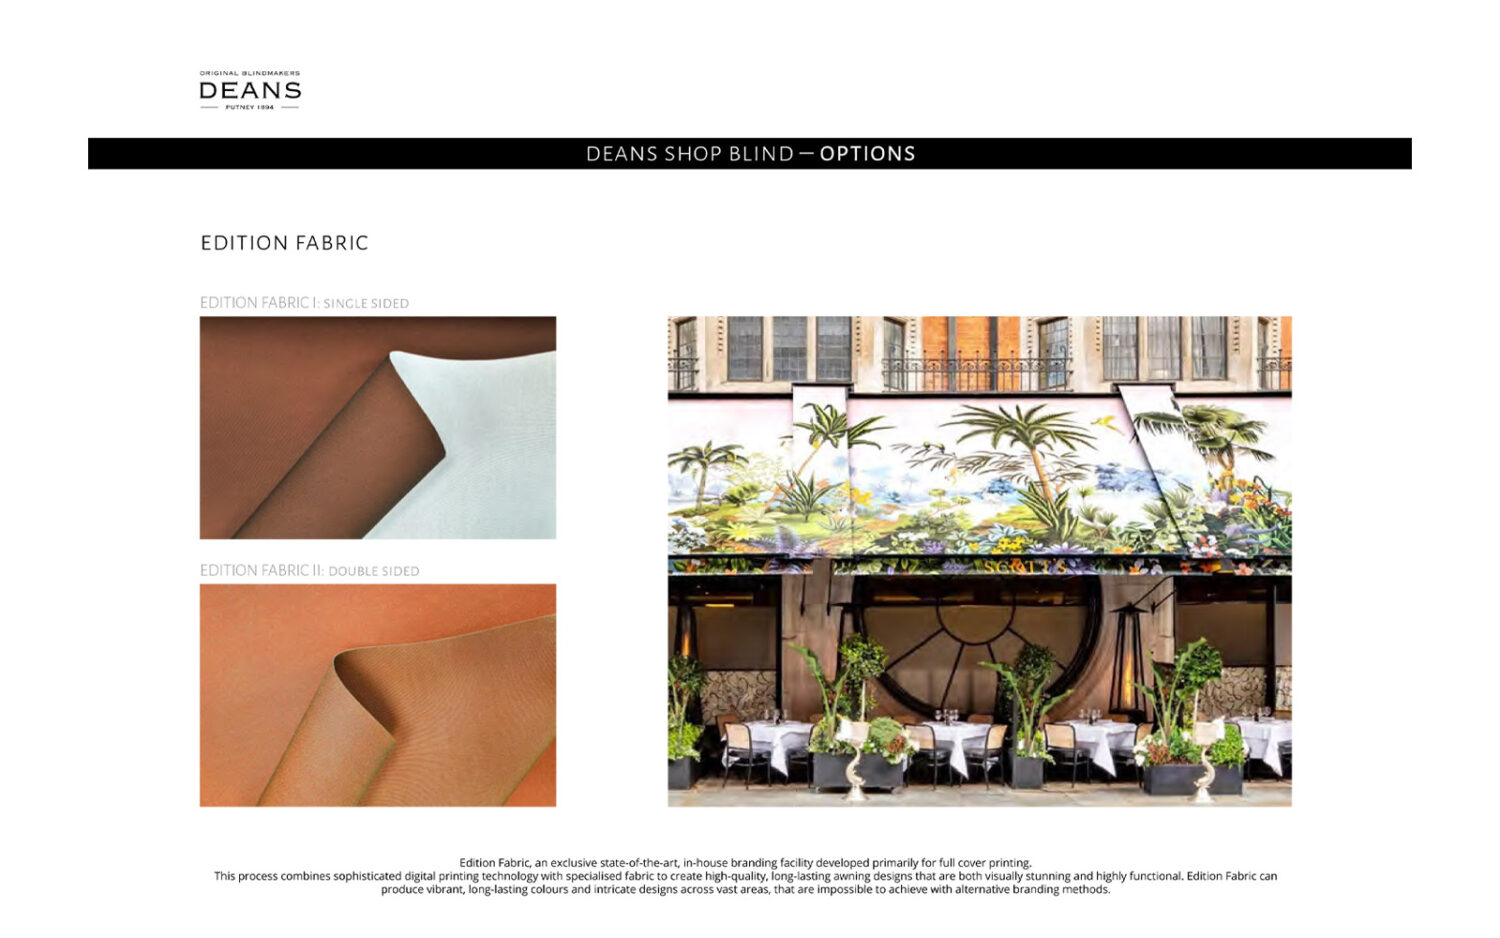 Awning Brochure by Deans